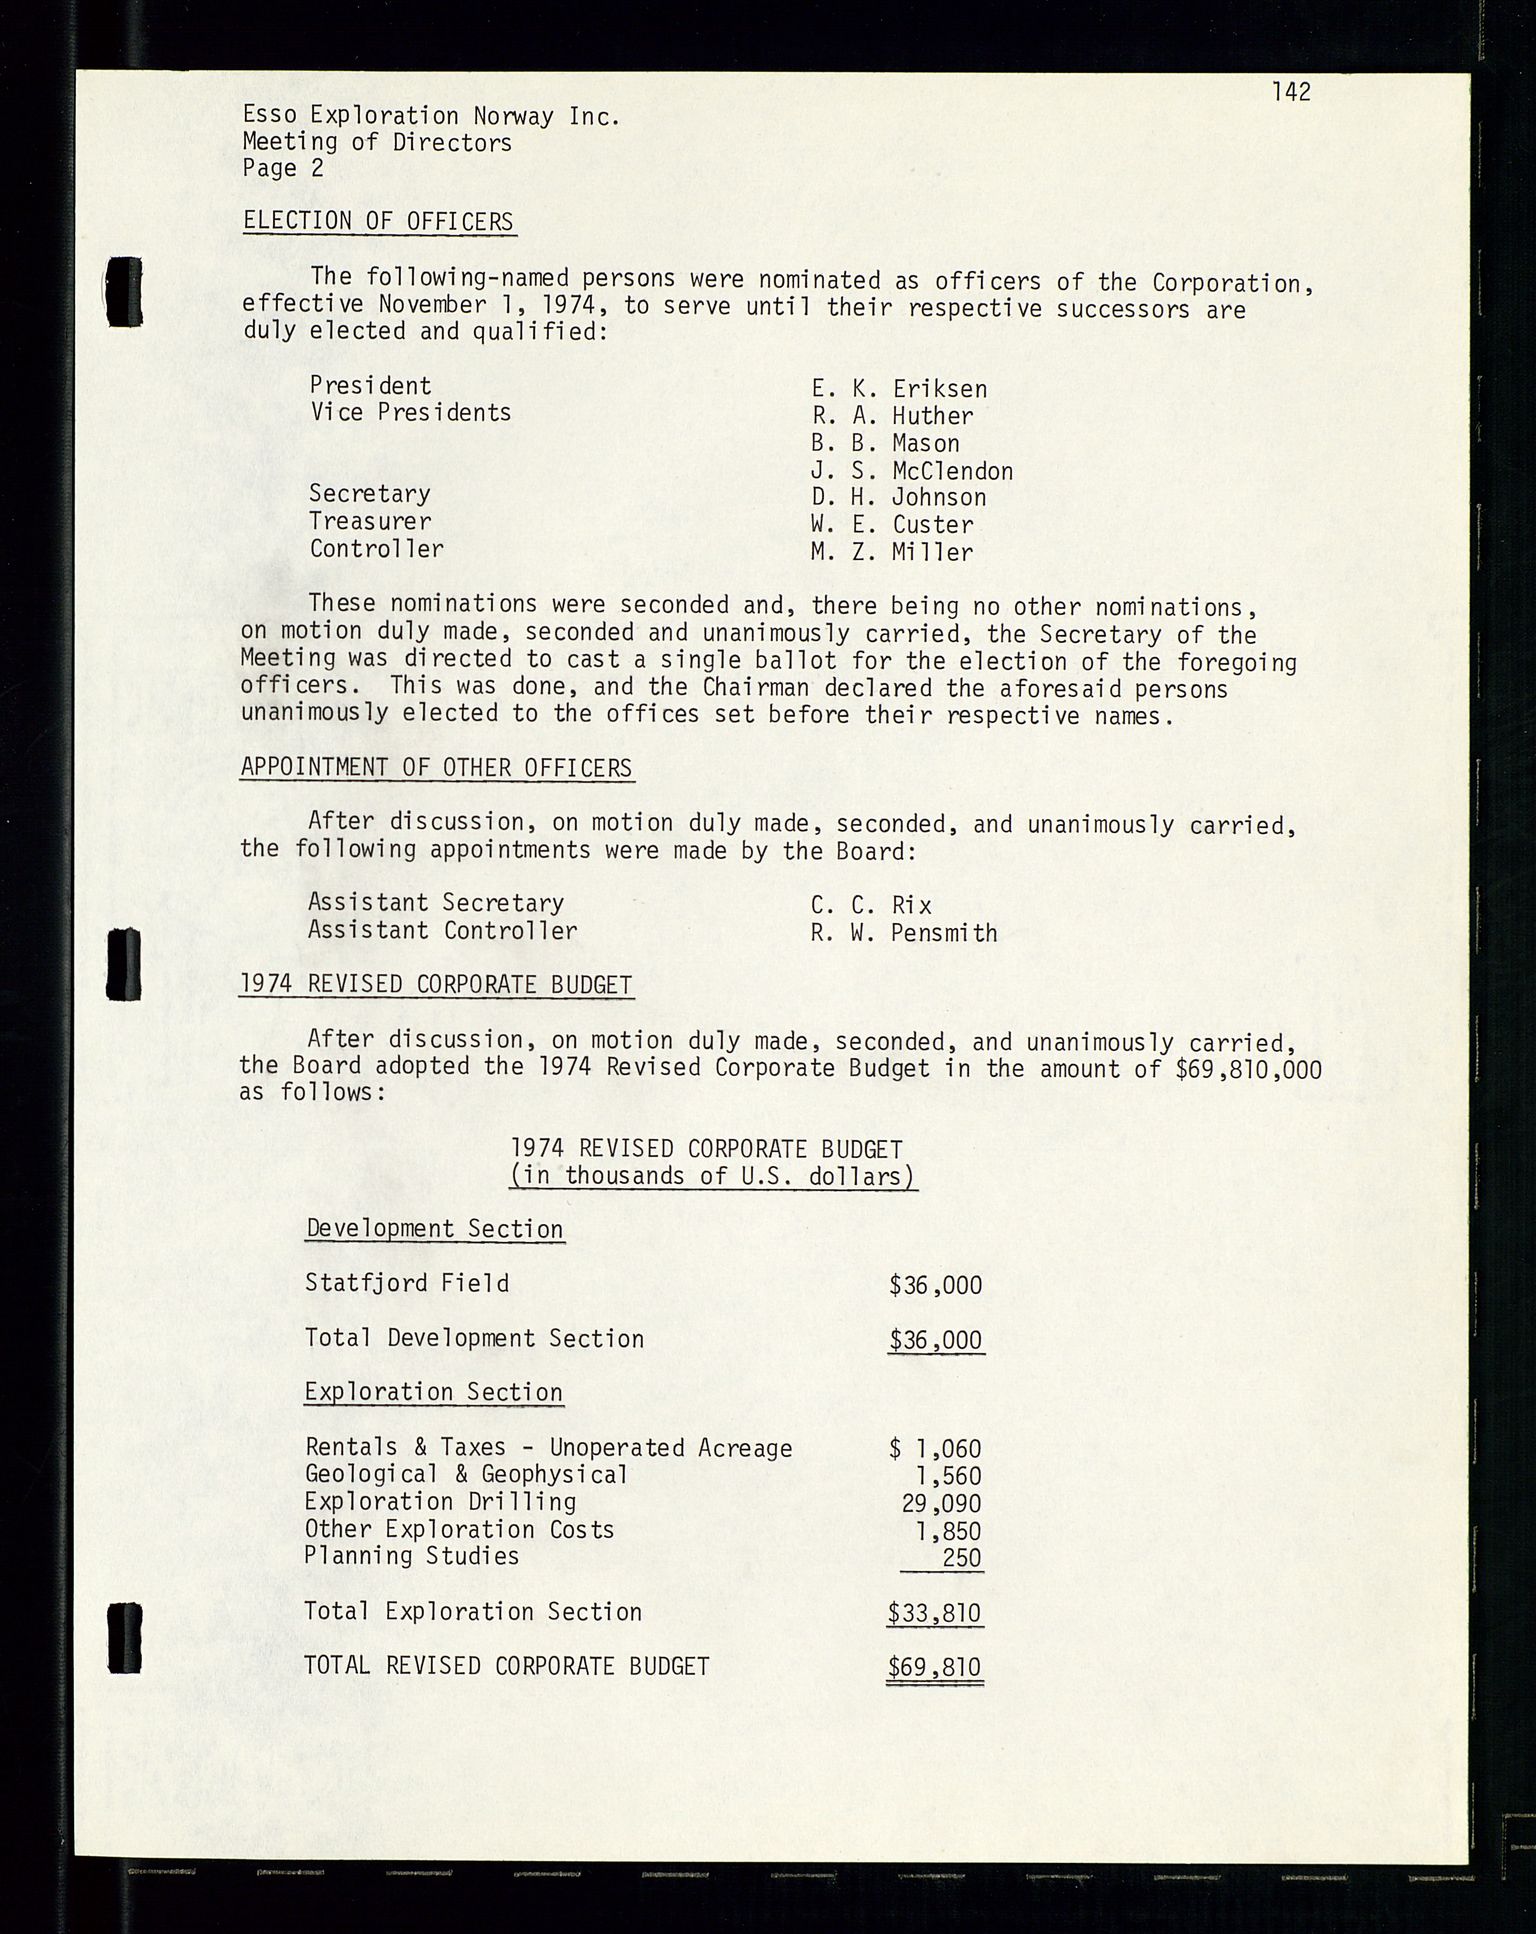 Pa 1512 - Esso Exploration and Production Norway Inc., SAST/A-101917/A/Aa/L0001/0001: Styredokumenter / Corporate records, By-Laws, Board meeting minutes, Incorporations, 1965-1975, p. 142